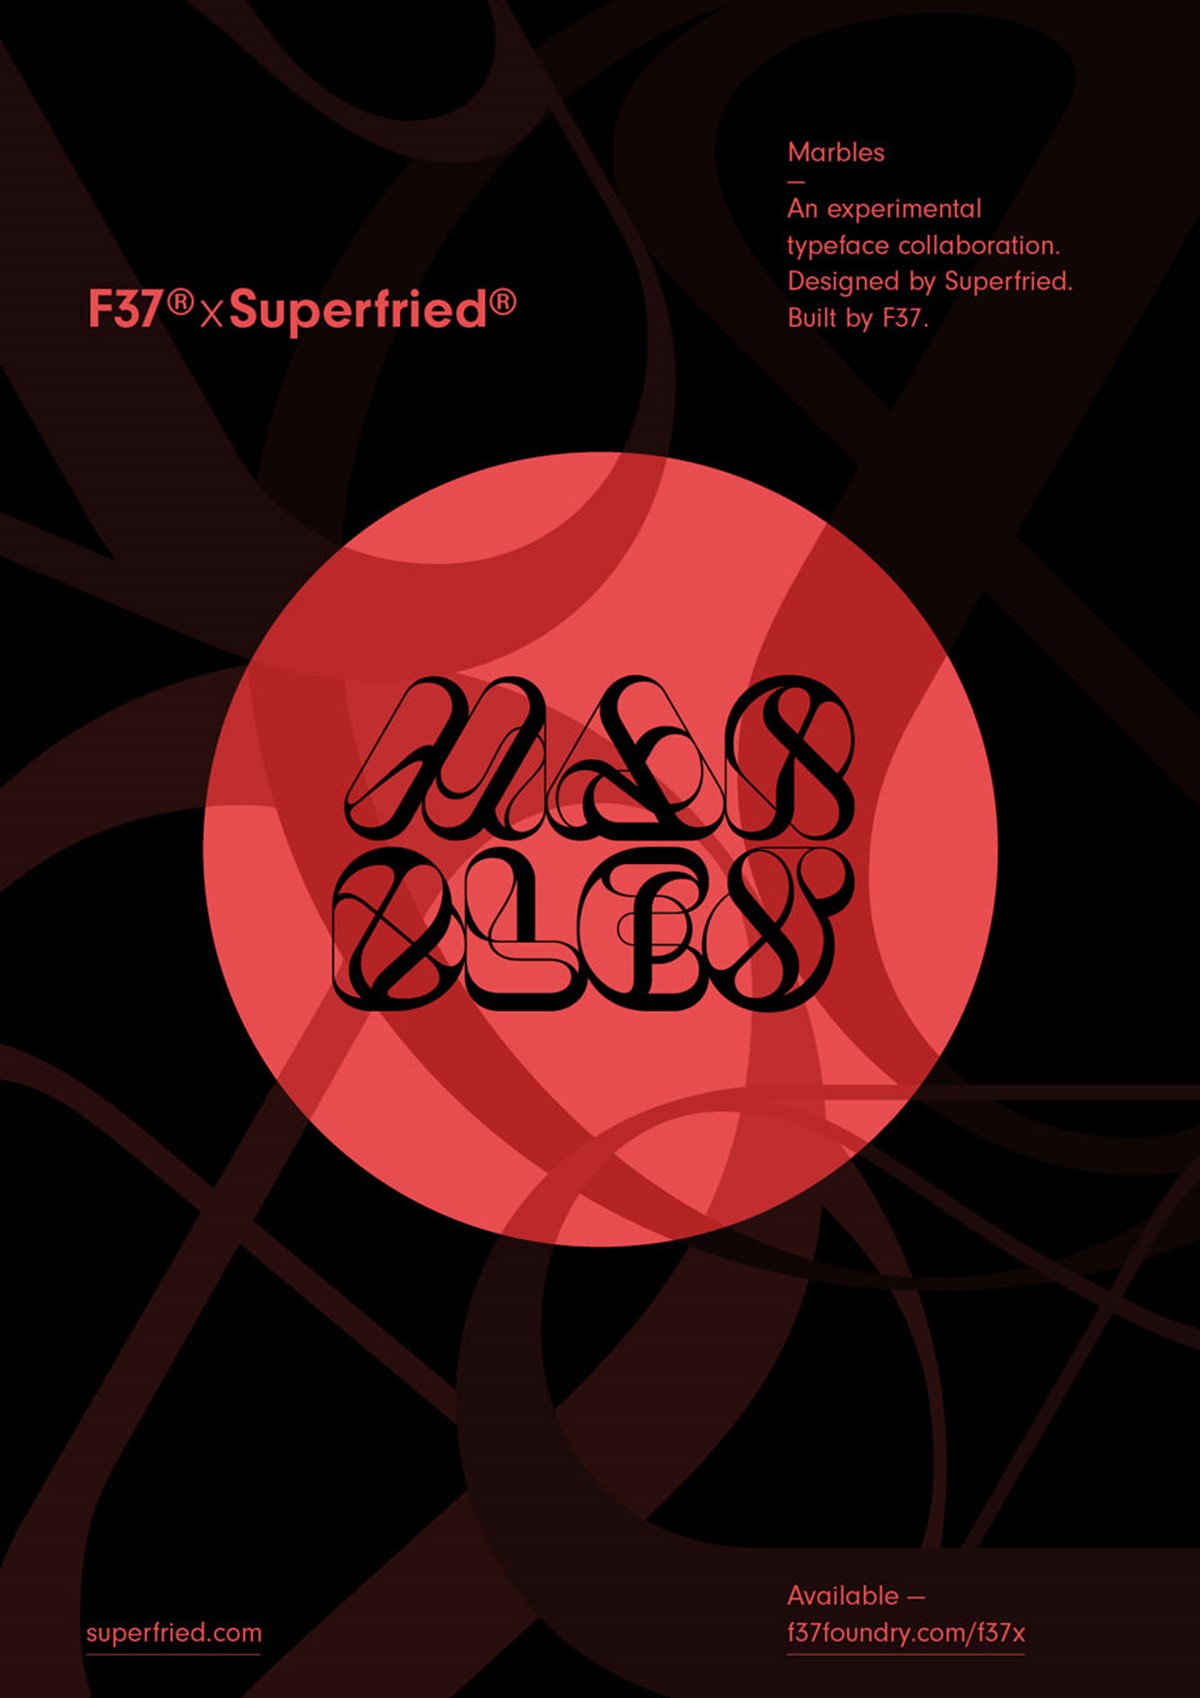 Marbles – An experimental typeface collaboration. Designed by Superfried. Built by F37. Manchester. Red logo poster.